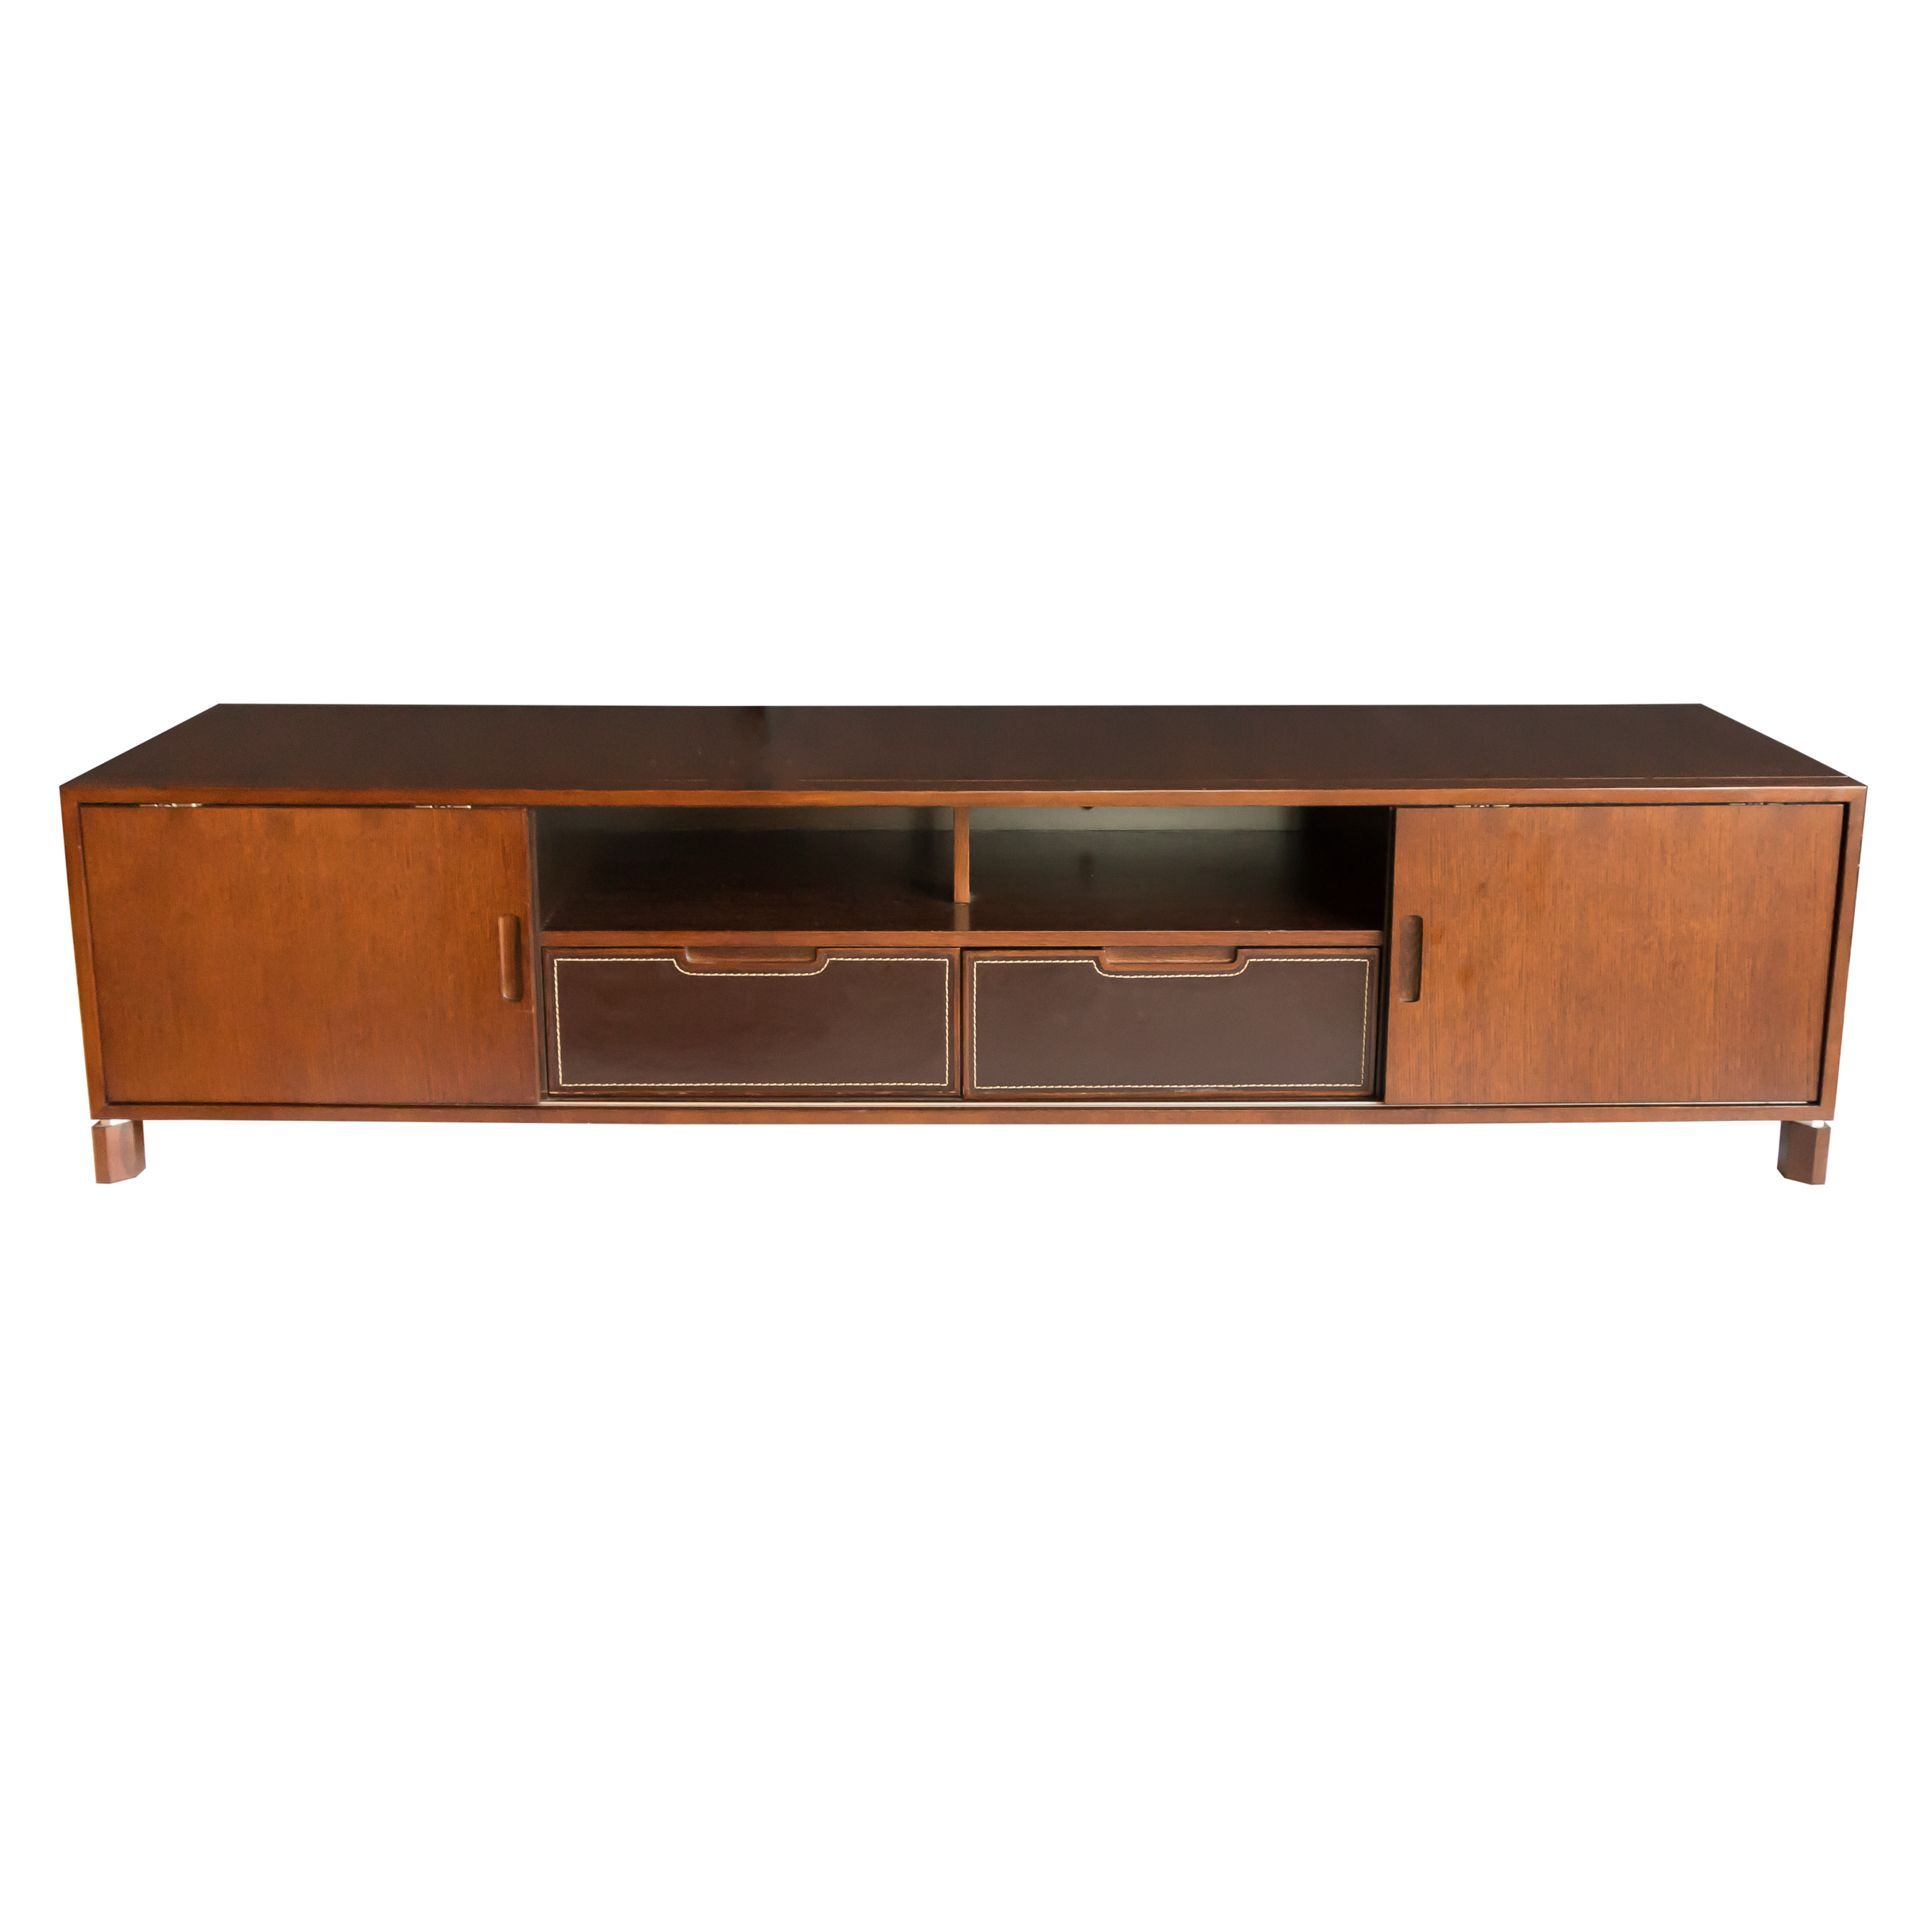 Low Profile Media Console Has A Dark Finish With Two Throughout Dark Brown Tv Cabinets With 2 Sliding Doors And Drawer (View 15 of 15)